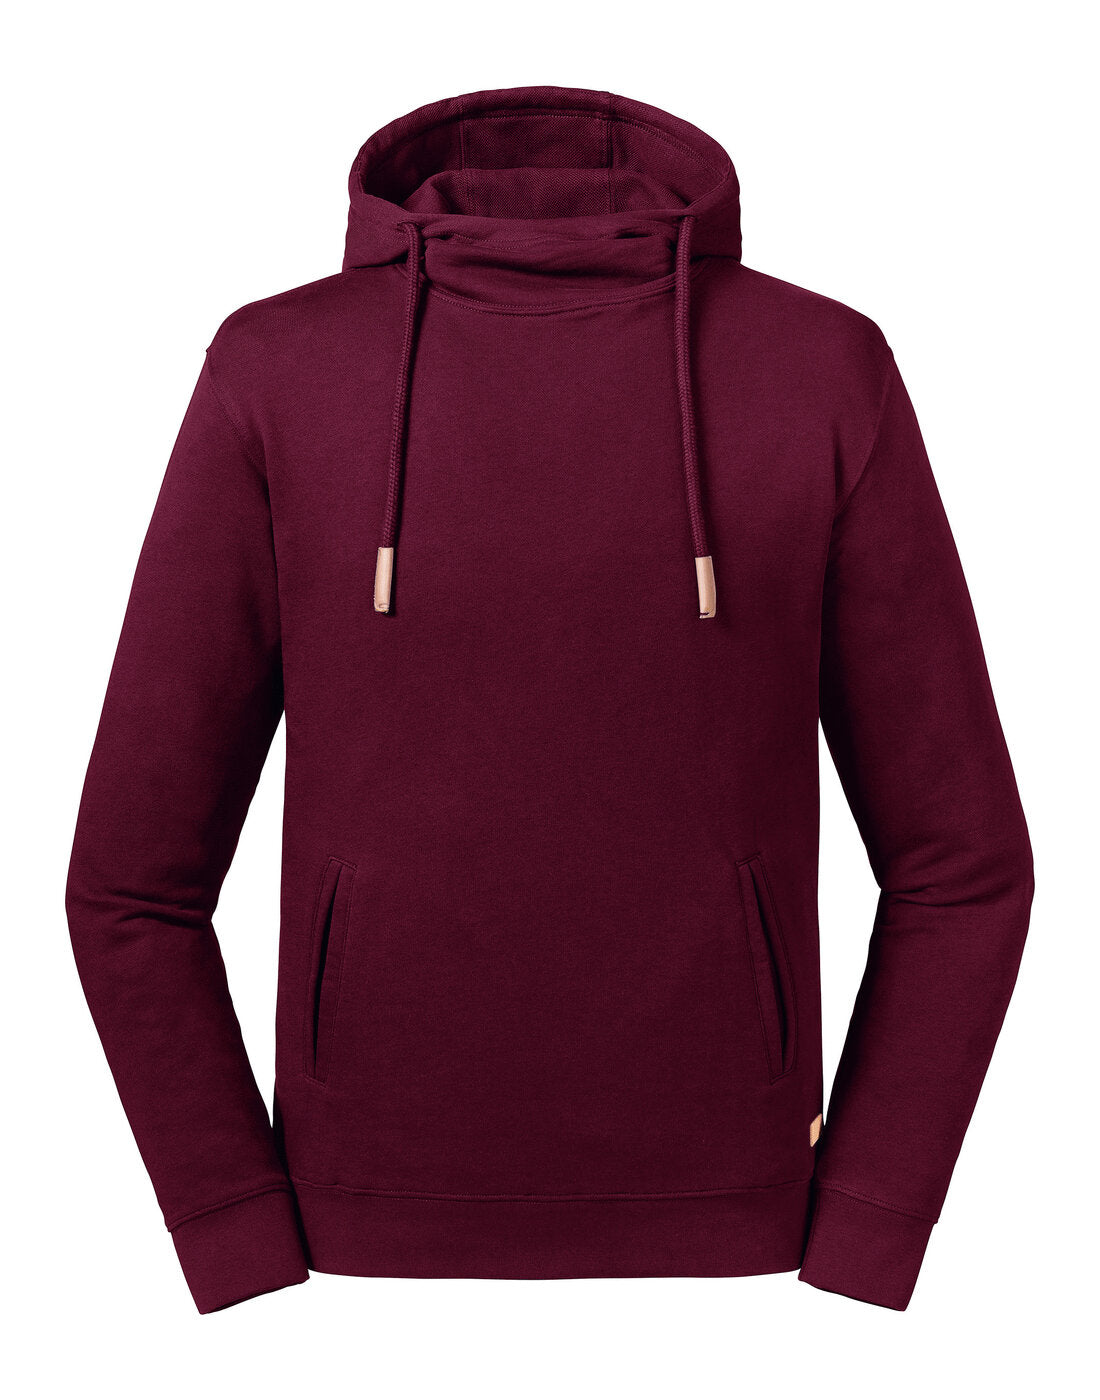 Russell Pure Prganic High Collared Hoodie Burgundy